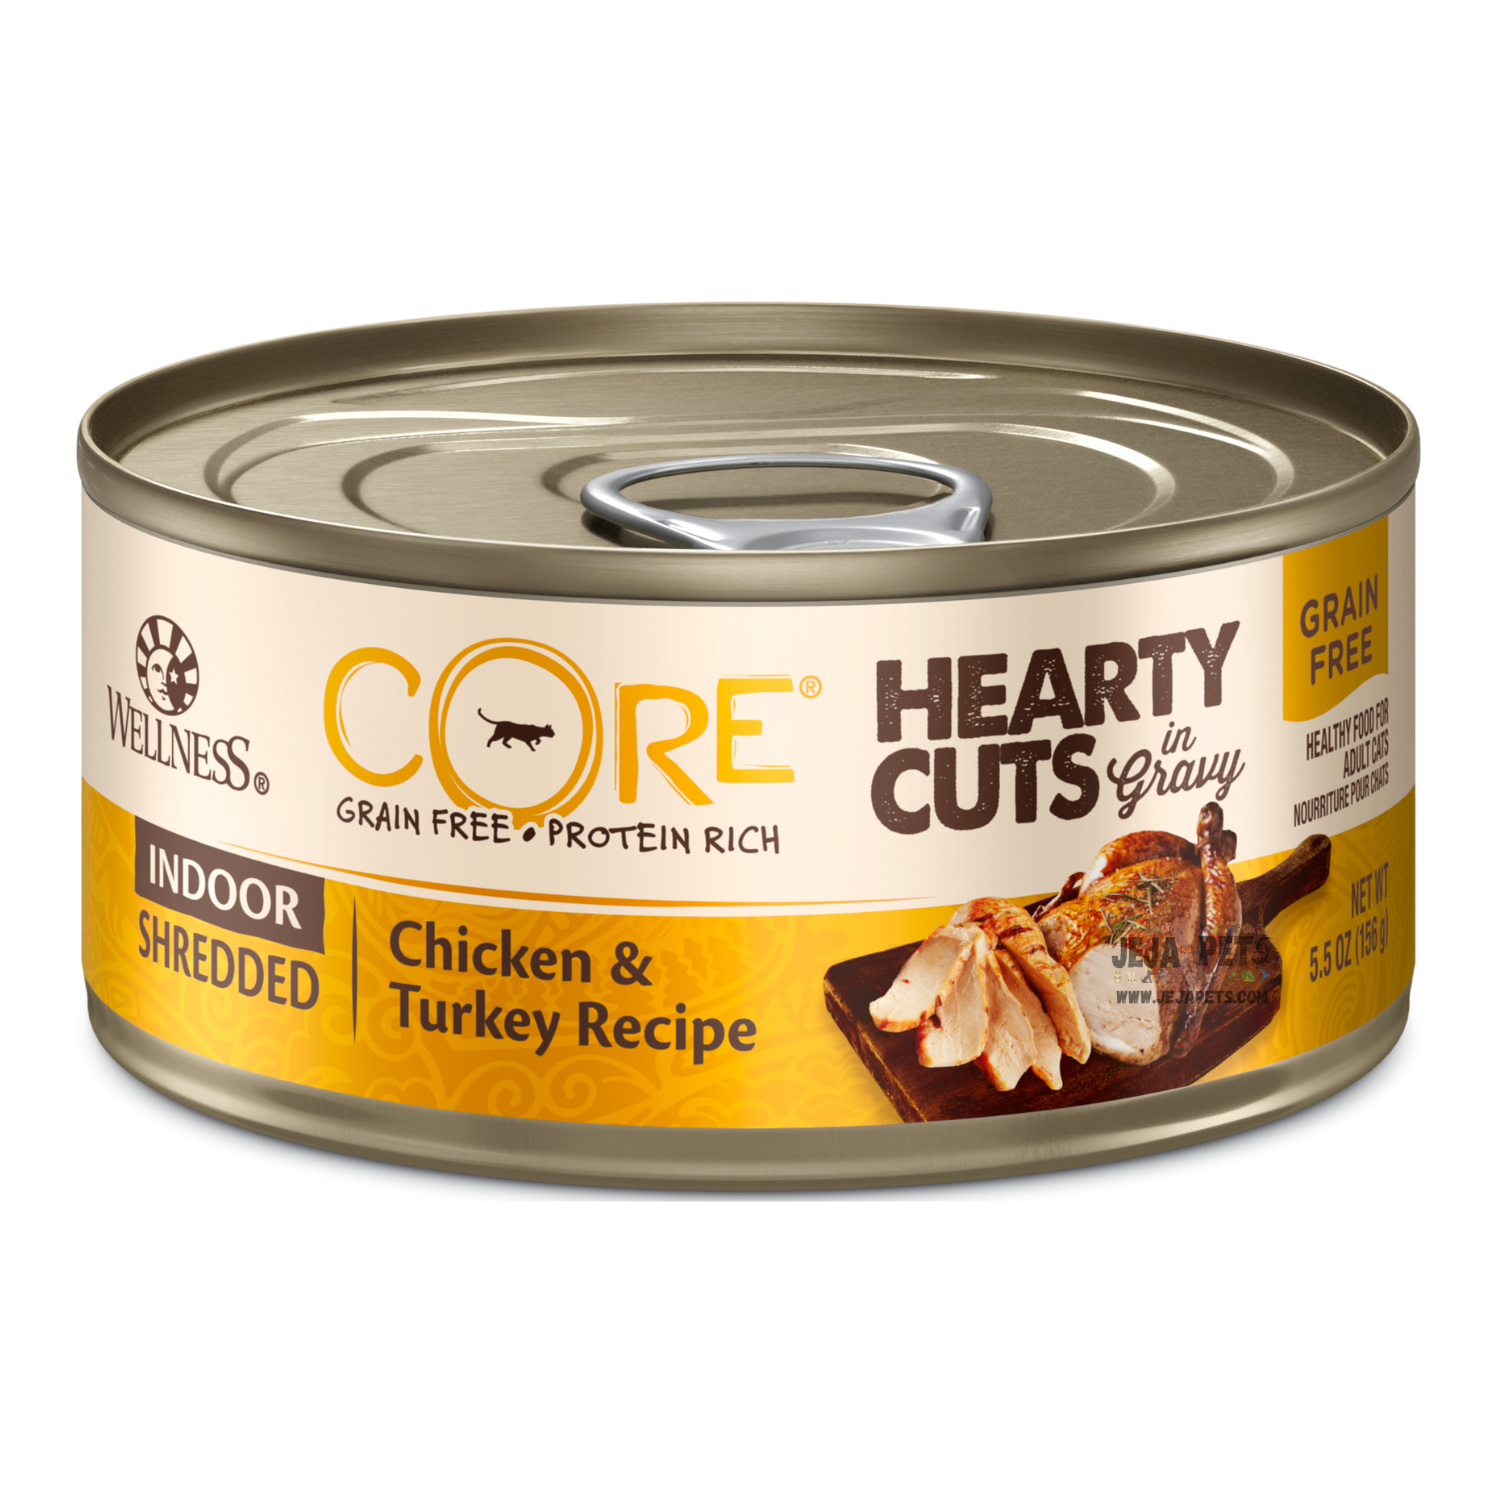 Wellness CORE® Hearty Cuts Shredded Indoor (Chicken & Turkey) Cat Canned Food - 156g